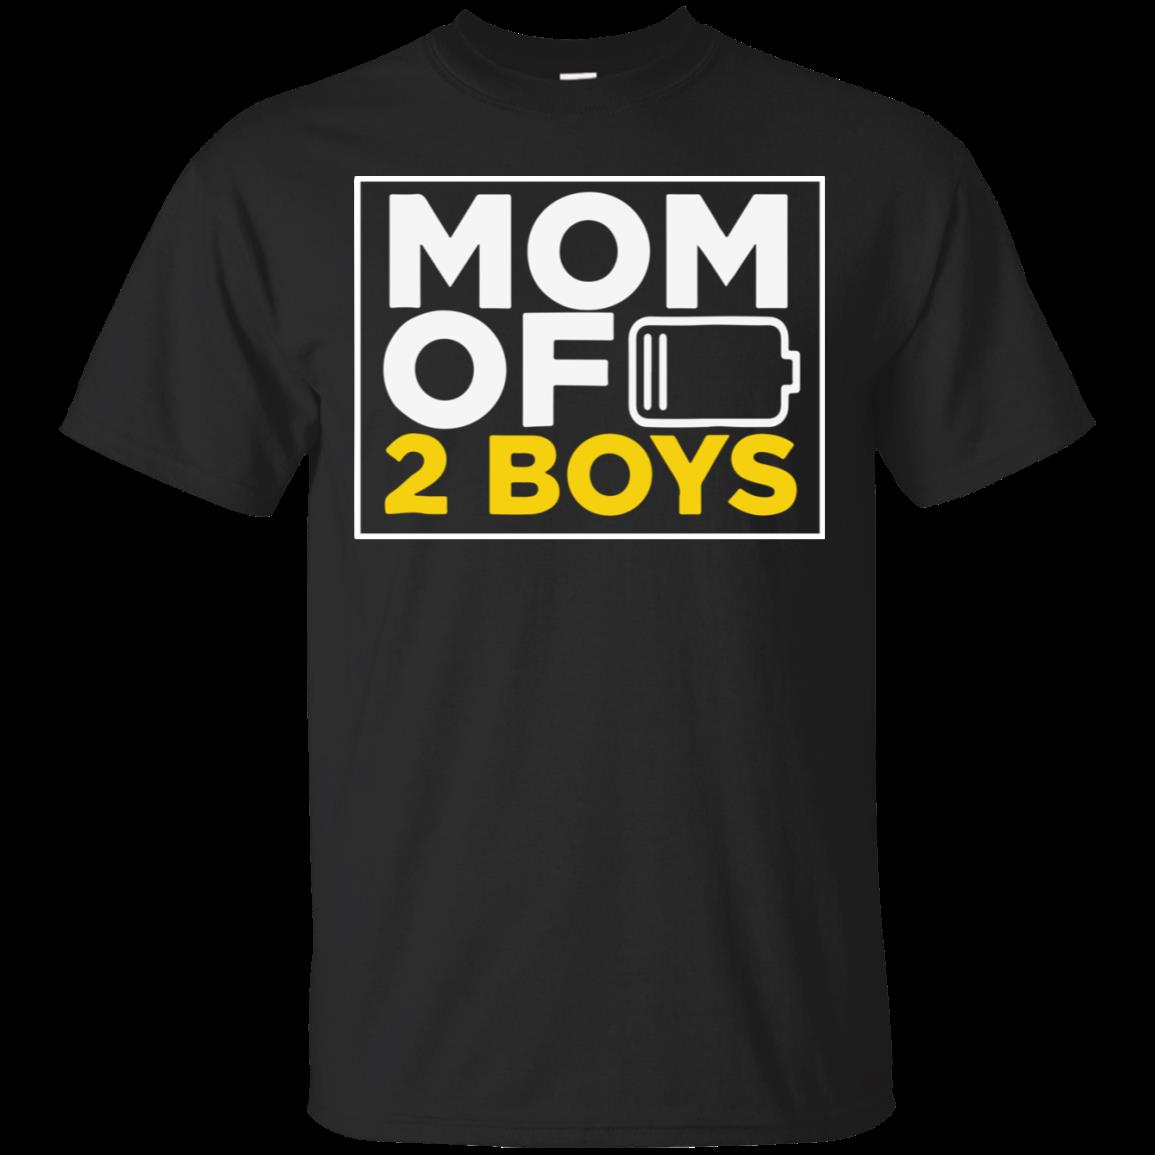 Mothers Day Shirt Gift Mom Of 2 Boys Tee For Women Mother Cotton Shirt